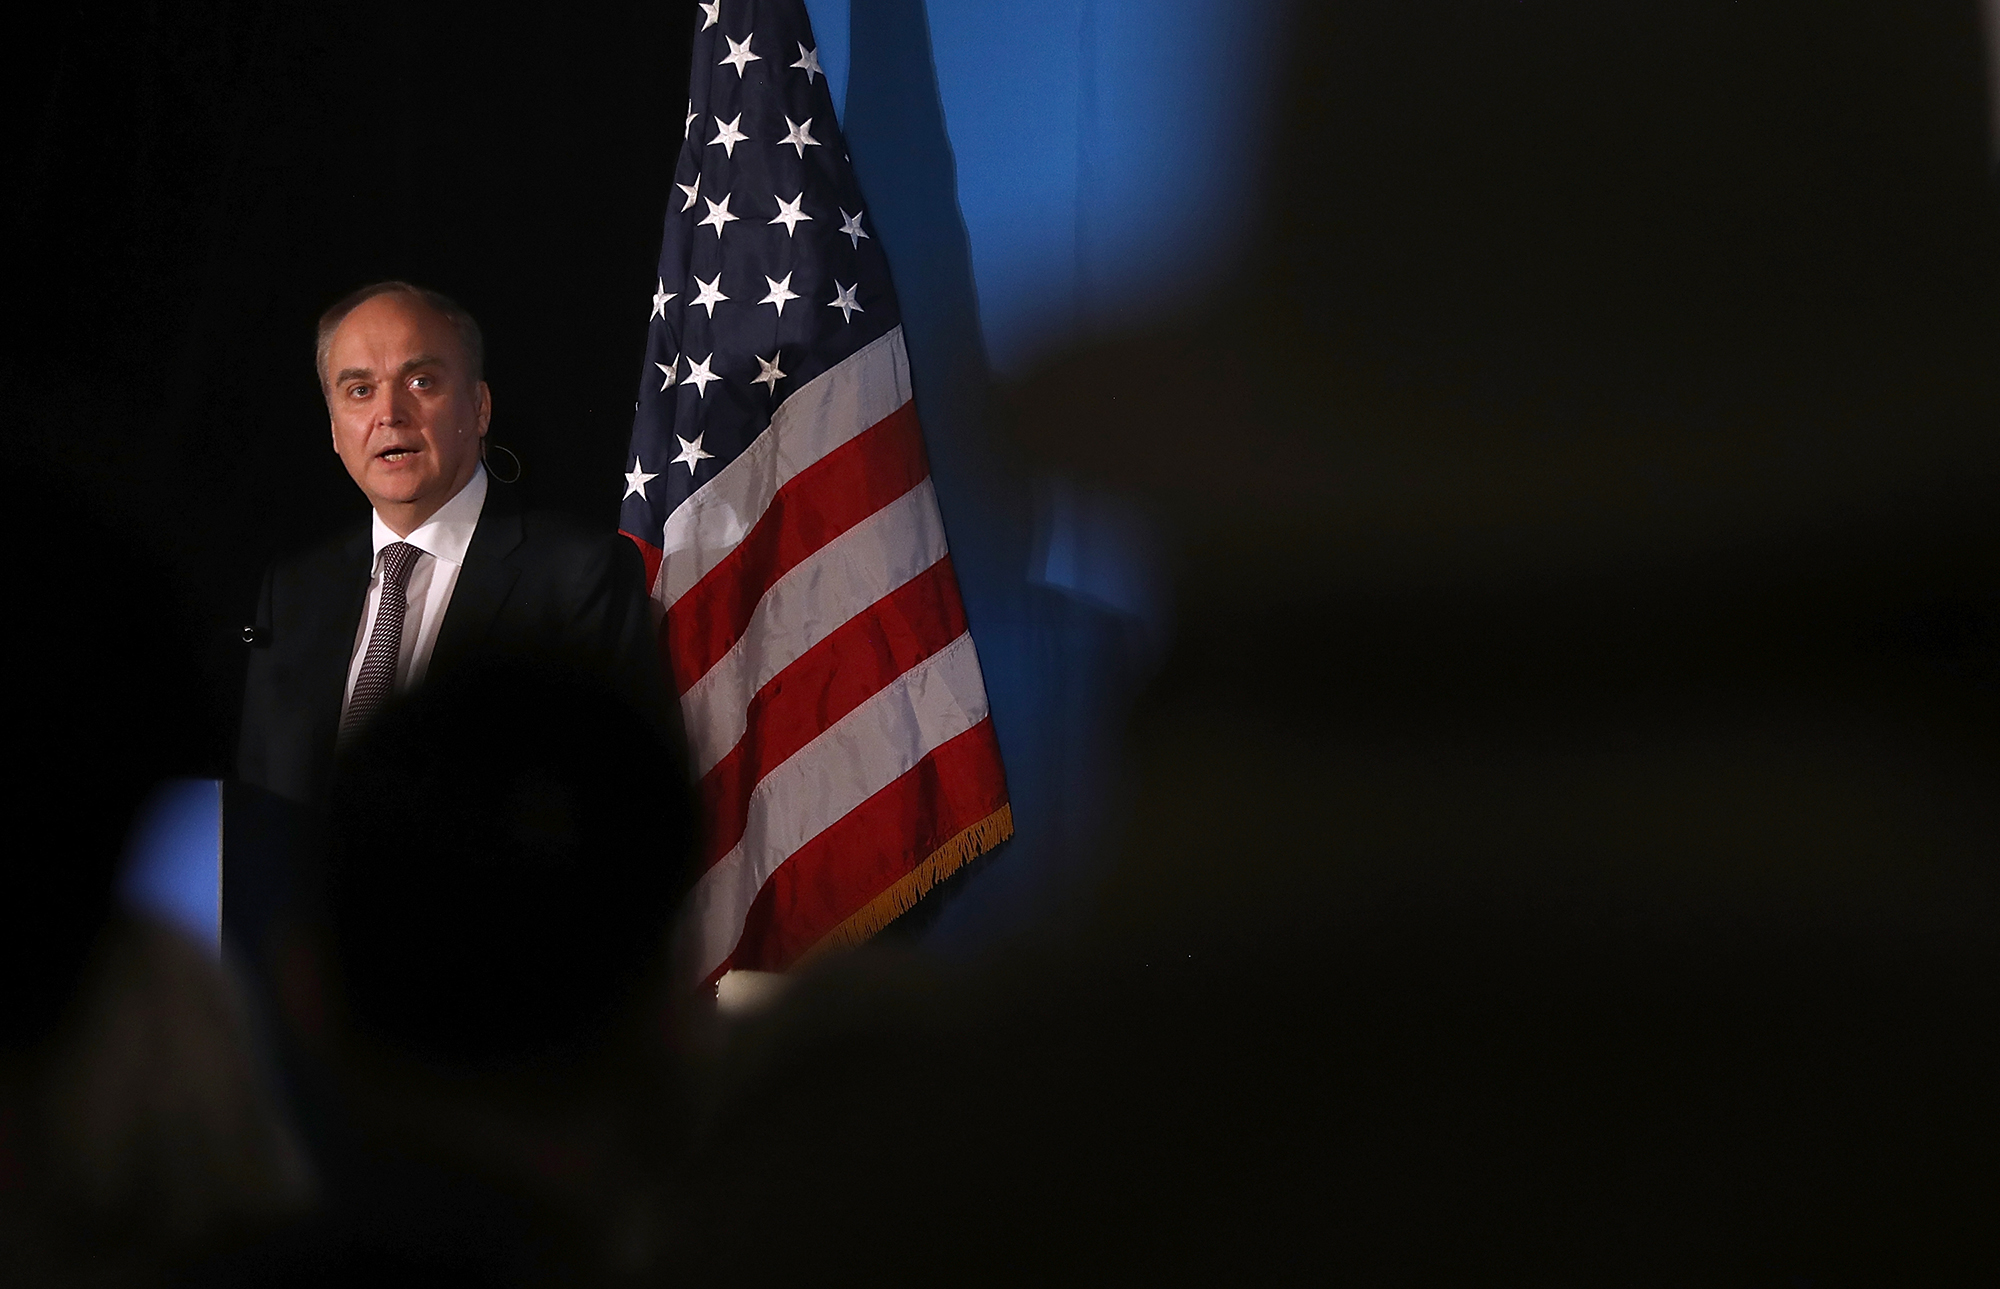 Russian Ambassador to the United States Anatoly Antonov speaks during a global affairs event at the Fairmont Hotel on November 29, 2017 in San Francisco, California. 